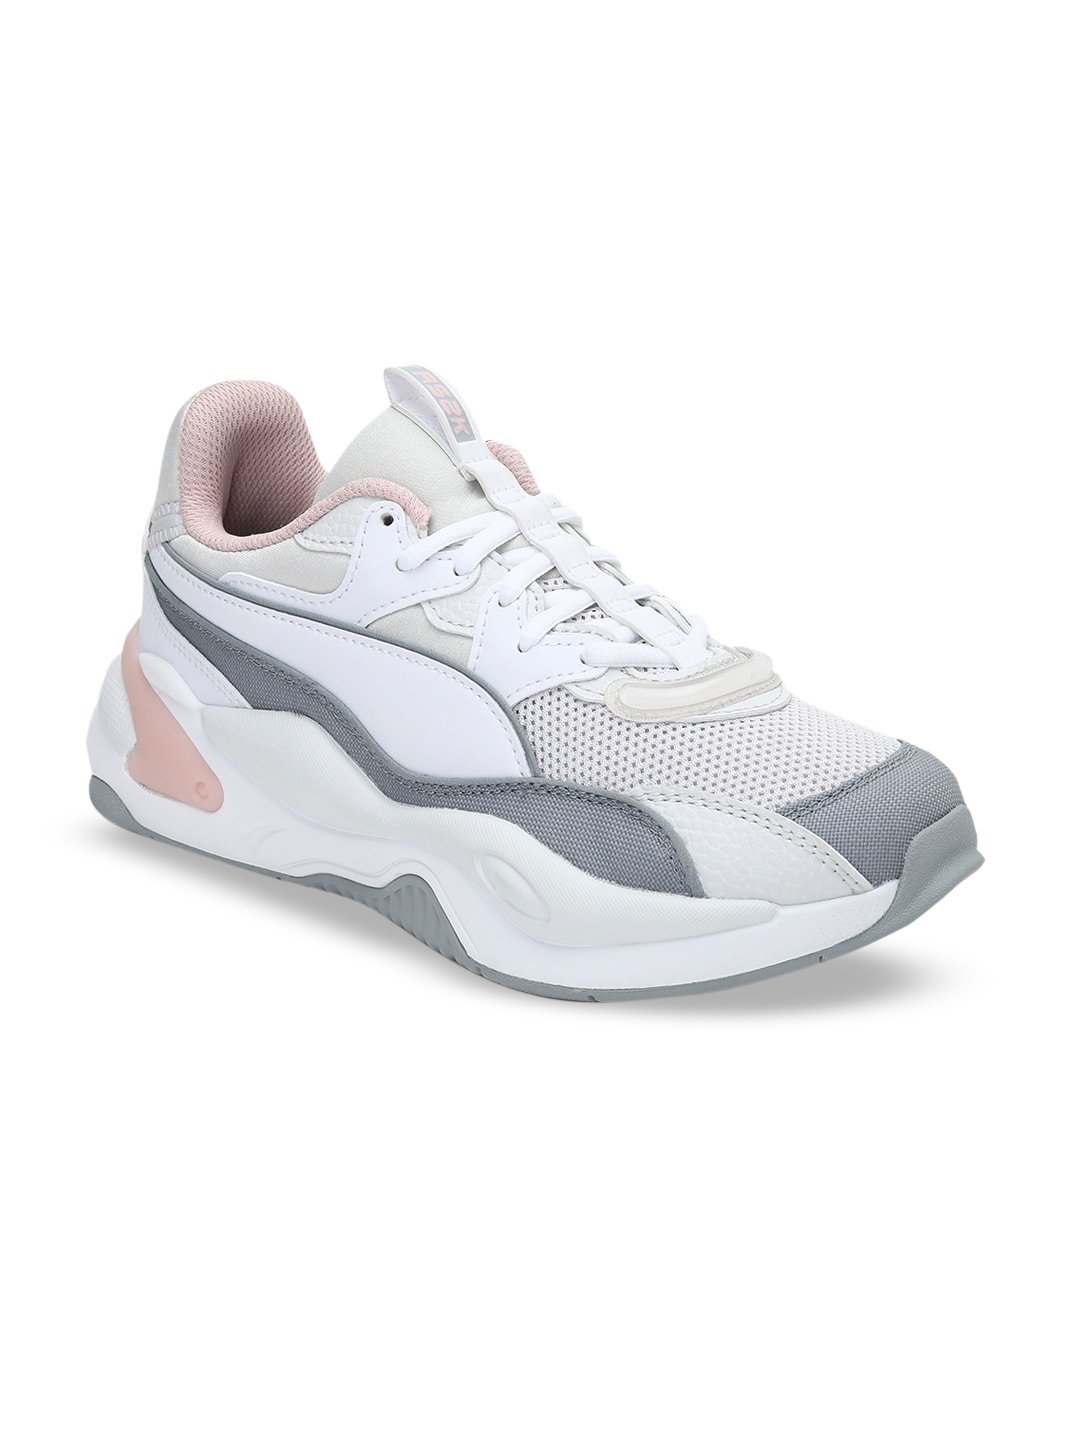 Buy Puma Unisex Cream Coloured Sneakers - Casual Shoes for Unisex ...